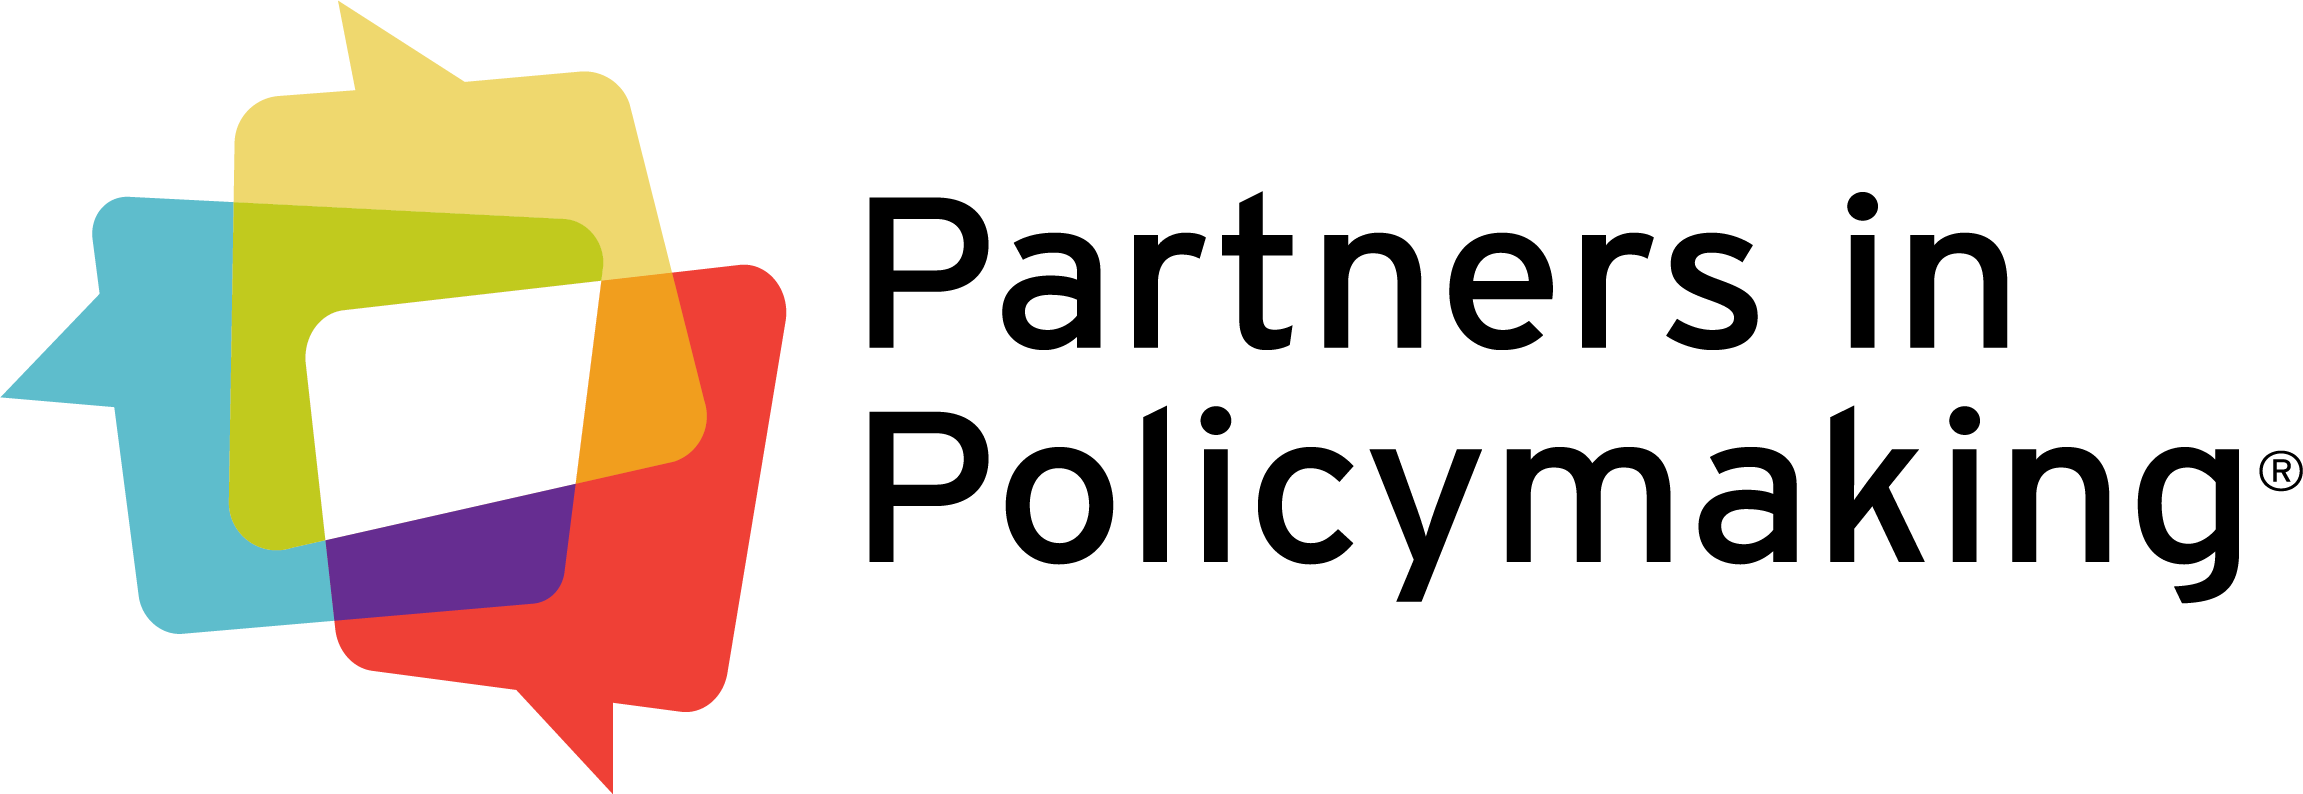 Partners in Policymaking 35th Anniversary